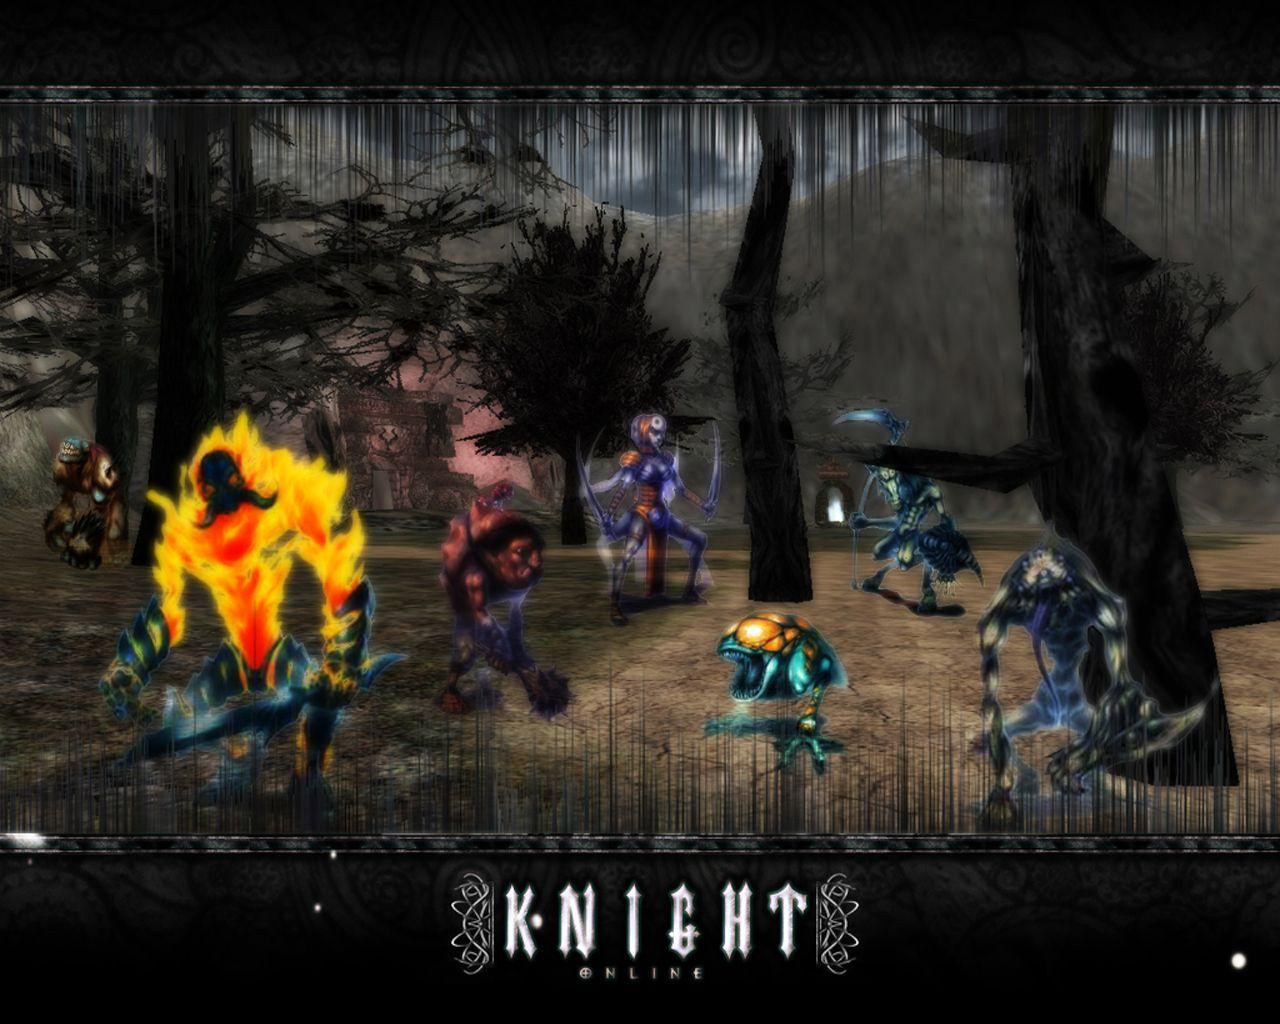 Knight Online screenshots, image and picture